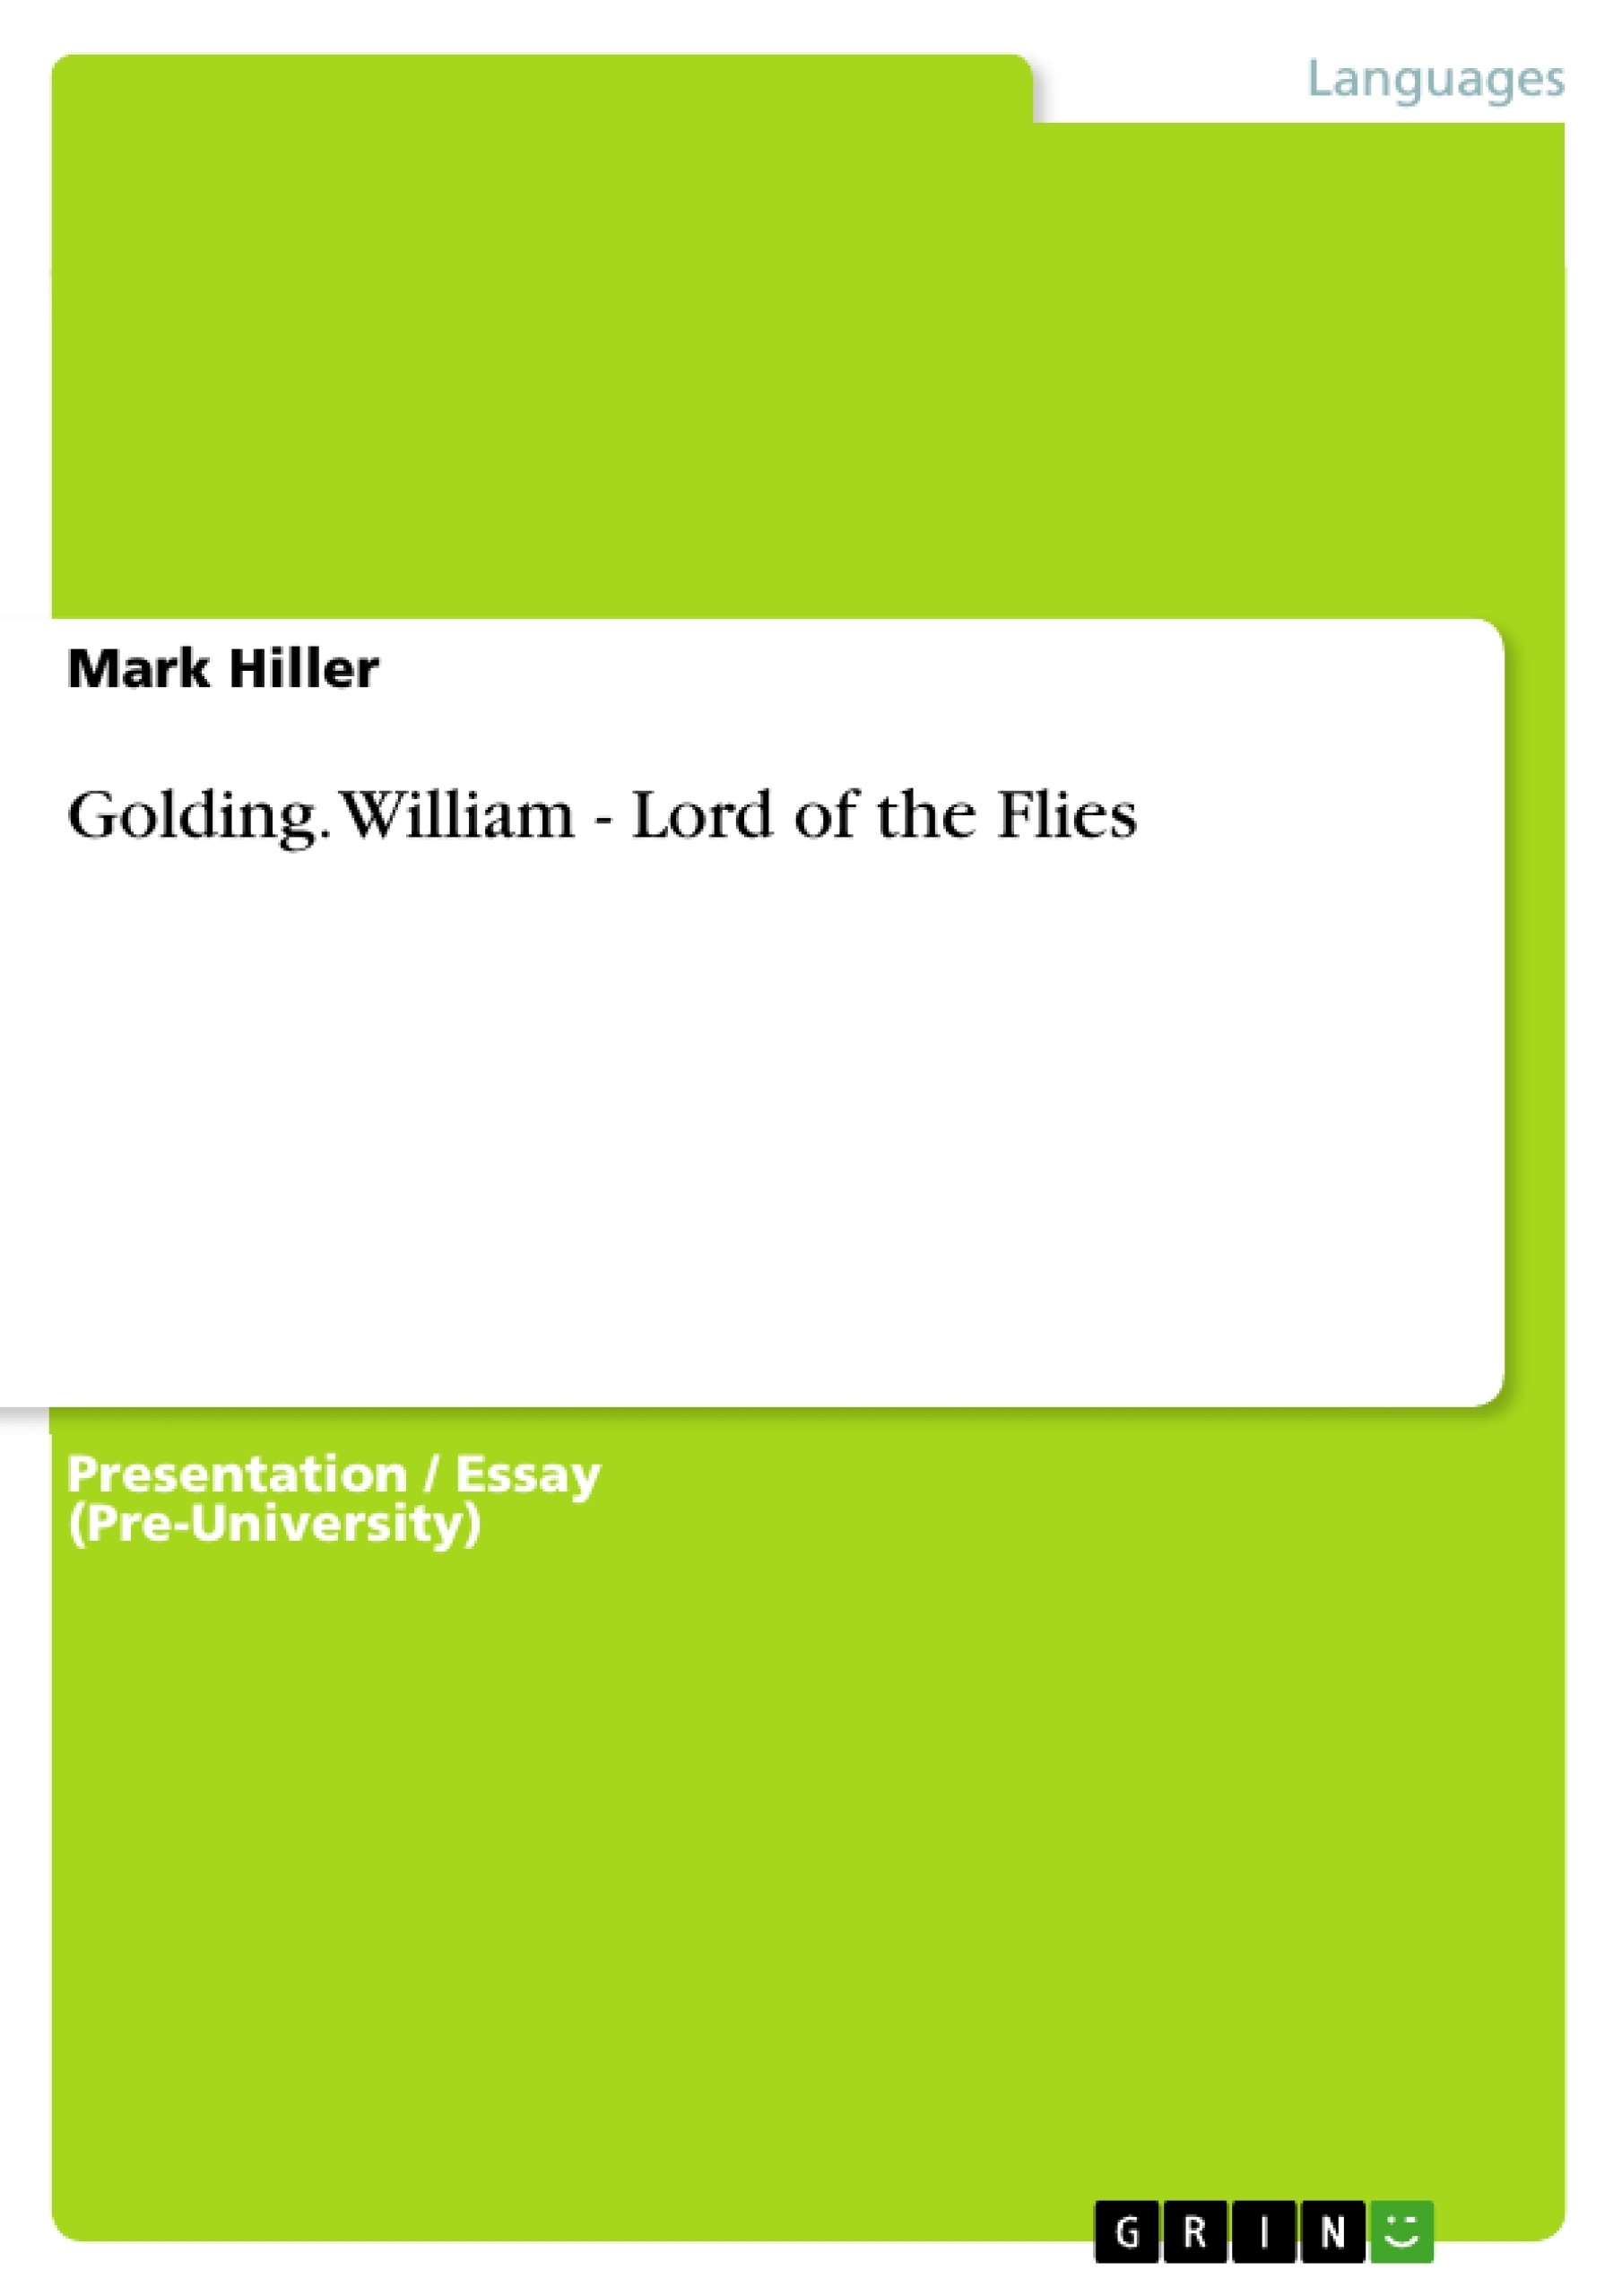 Titre: Golding. William - Lord of the Flies